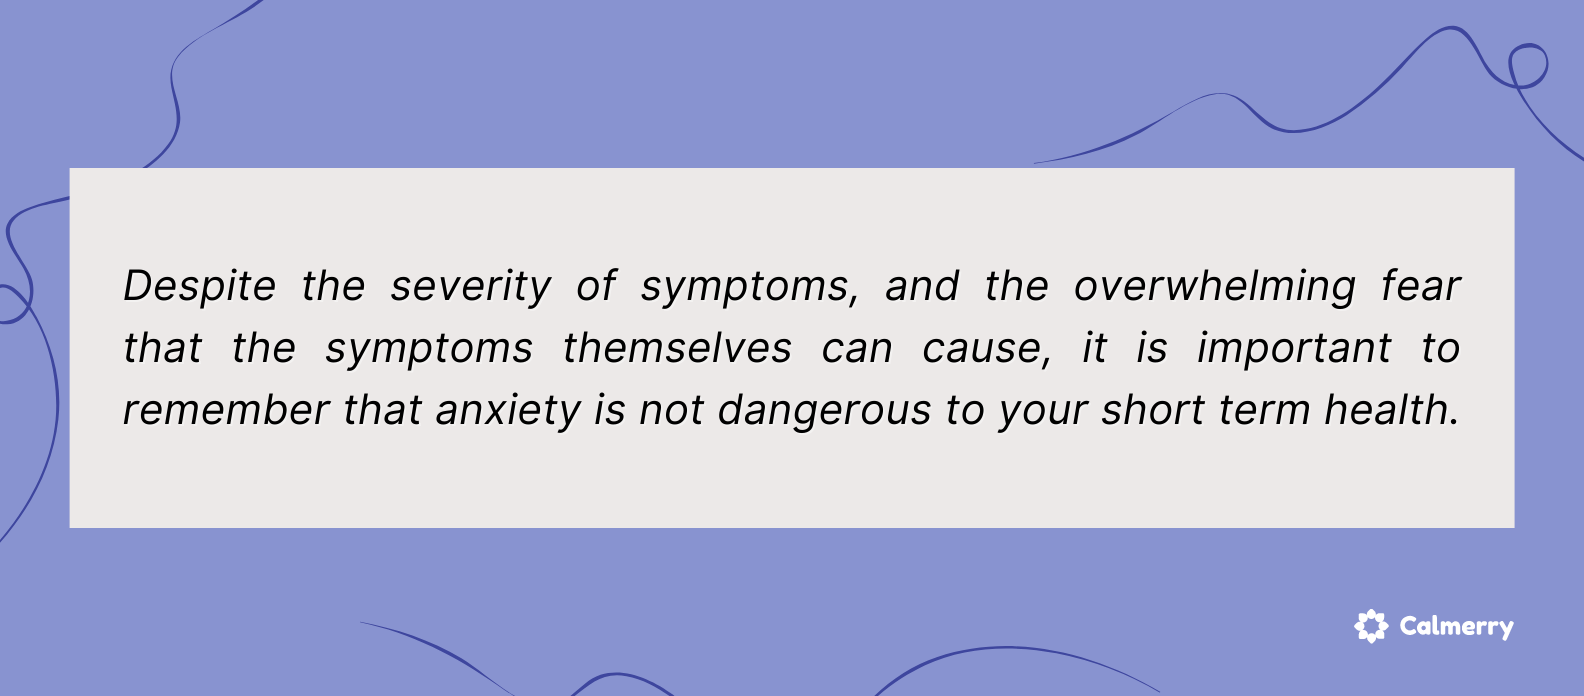 Anxiety is not dangerous to your short-term health